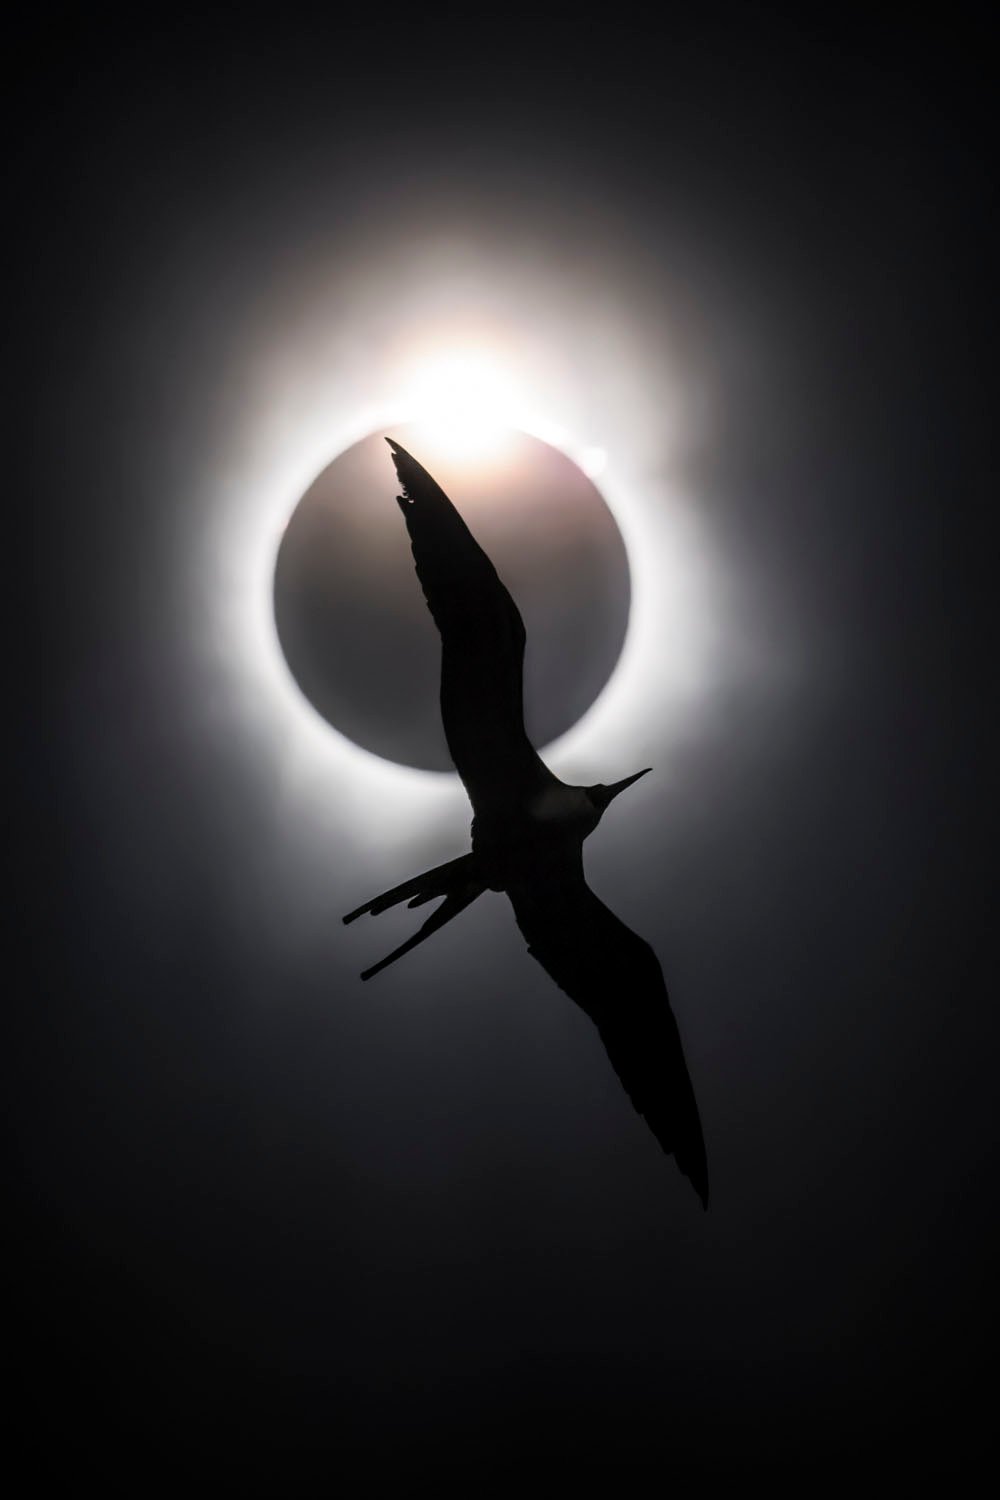 A silhouette of a bird flying before a solar eclipse, the bird's wings spread against the sun's halo, creating a dramatic image.